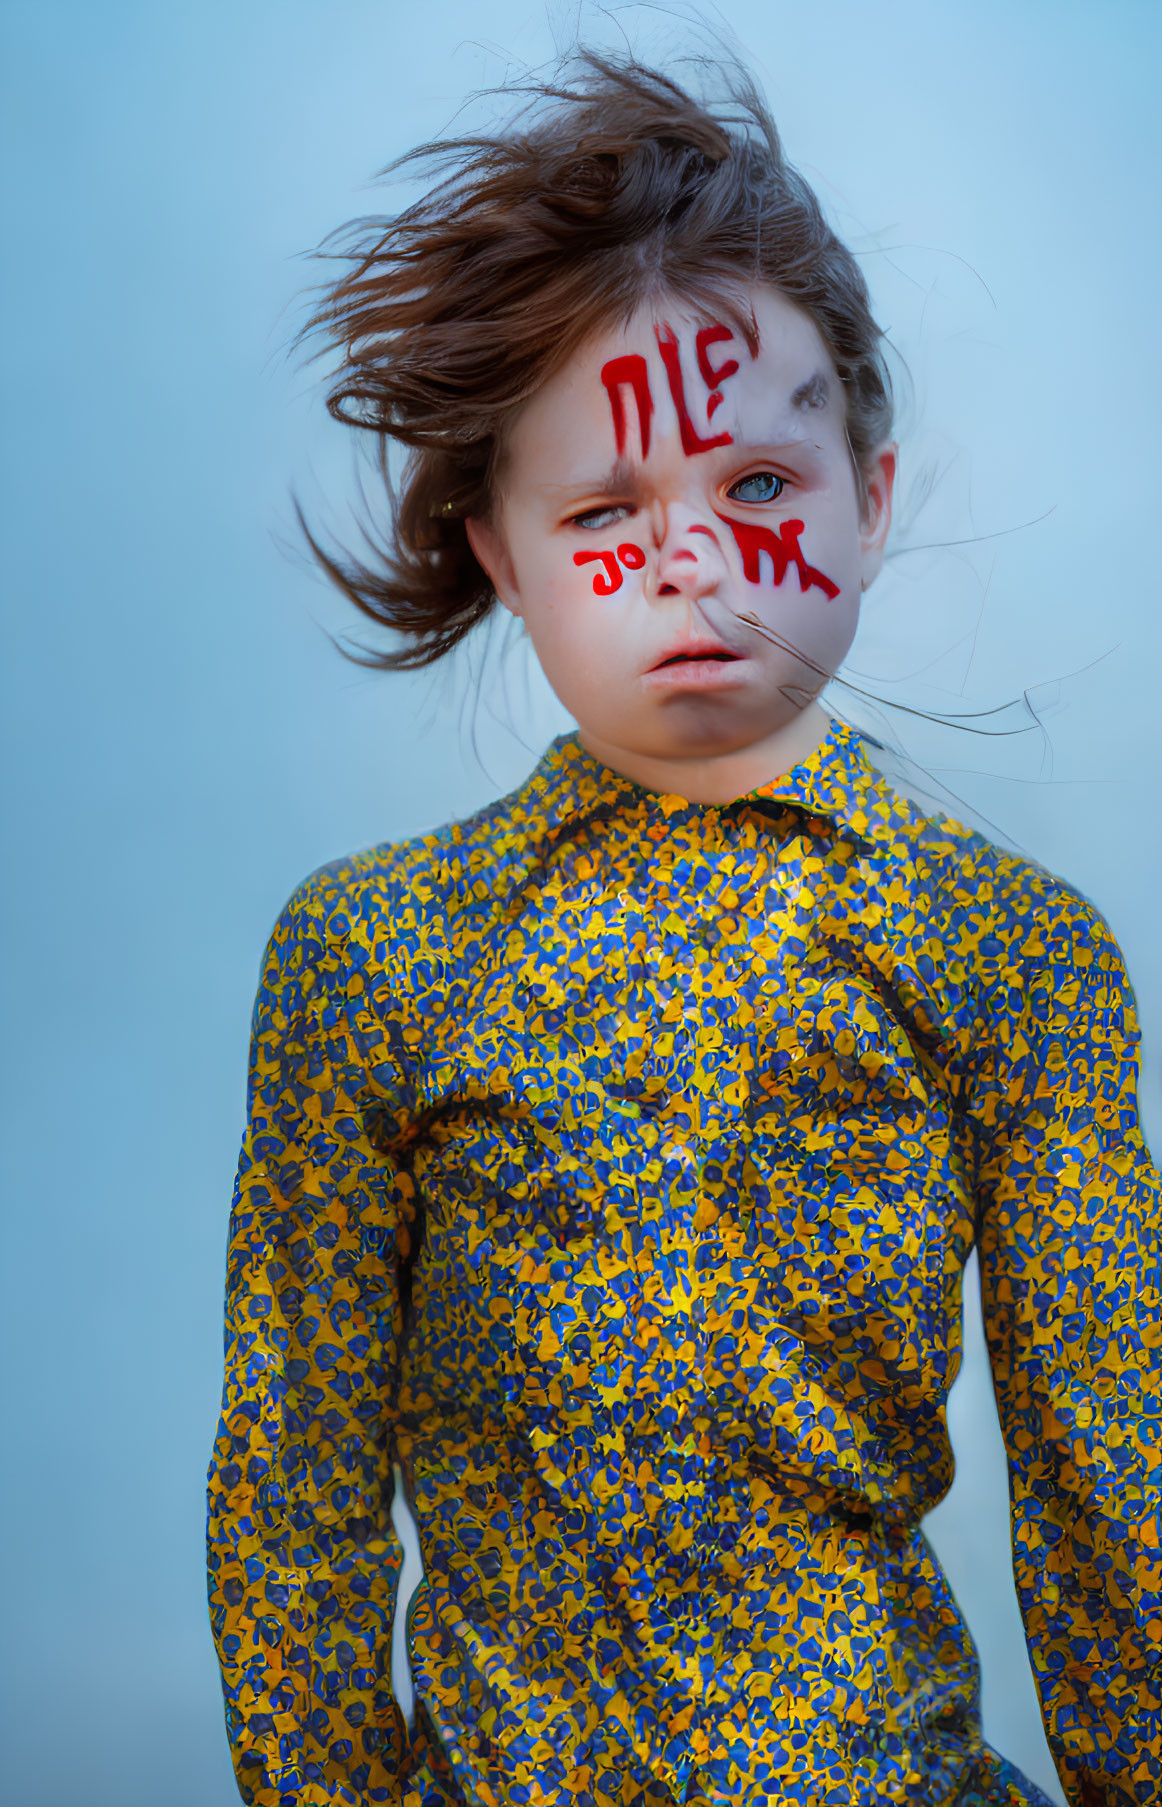 Child with solemn expression in yellow shirt with red writing on face